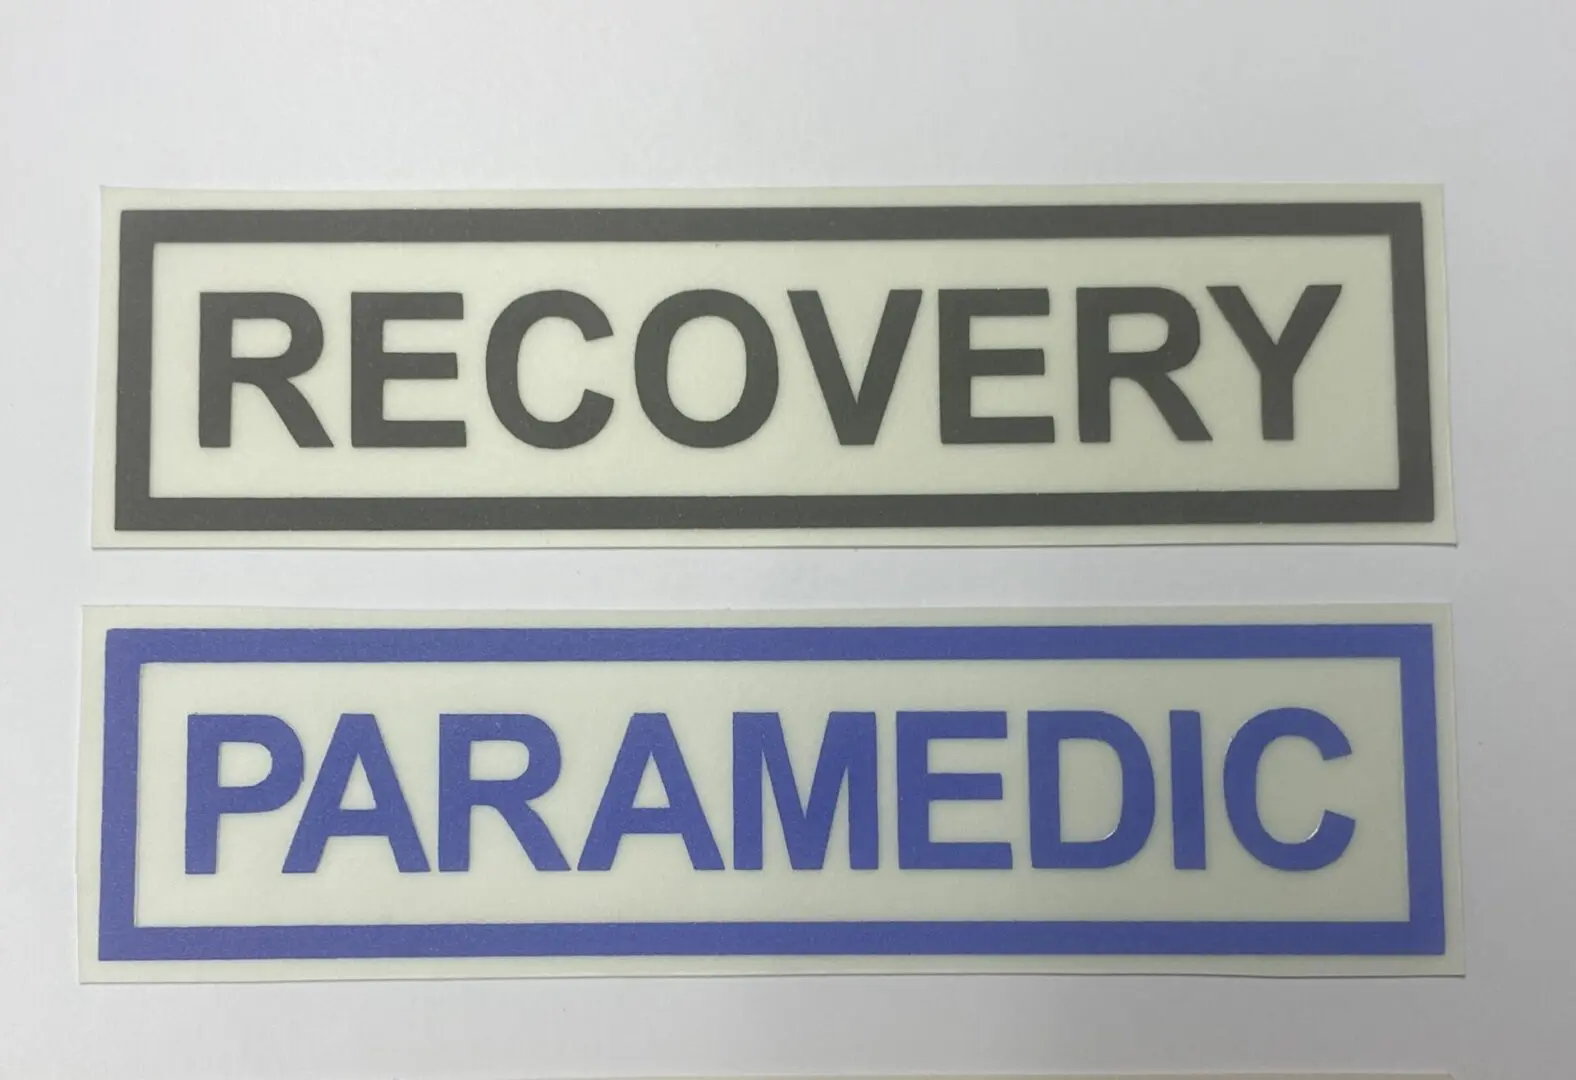 RECOVERY PARAMEDIC